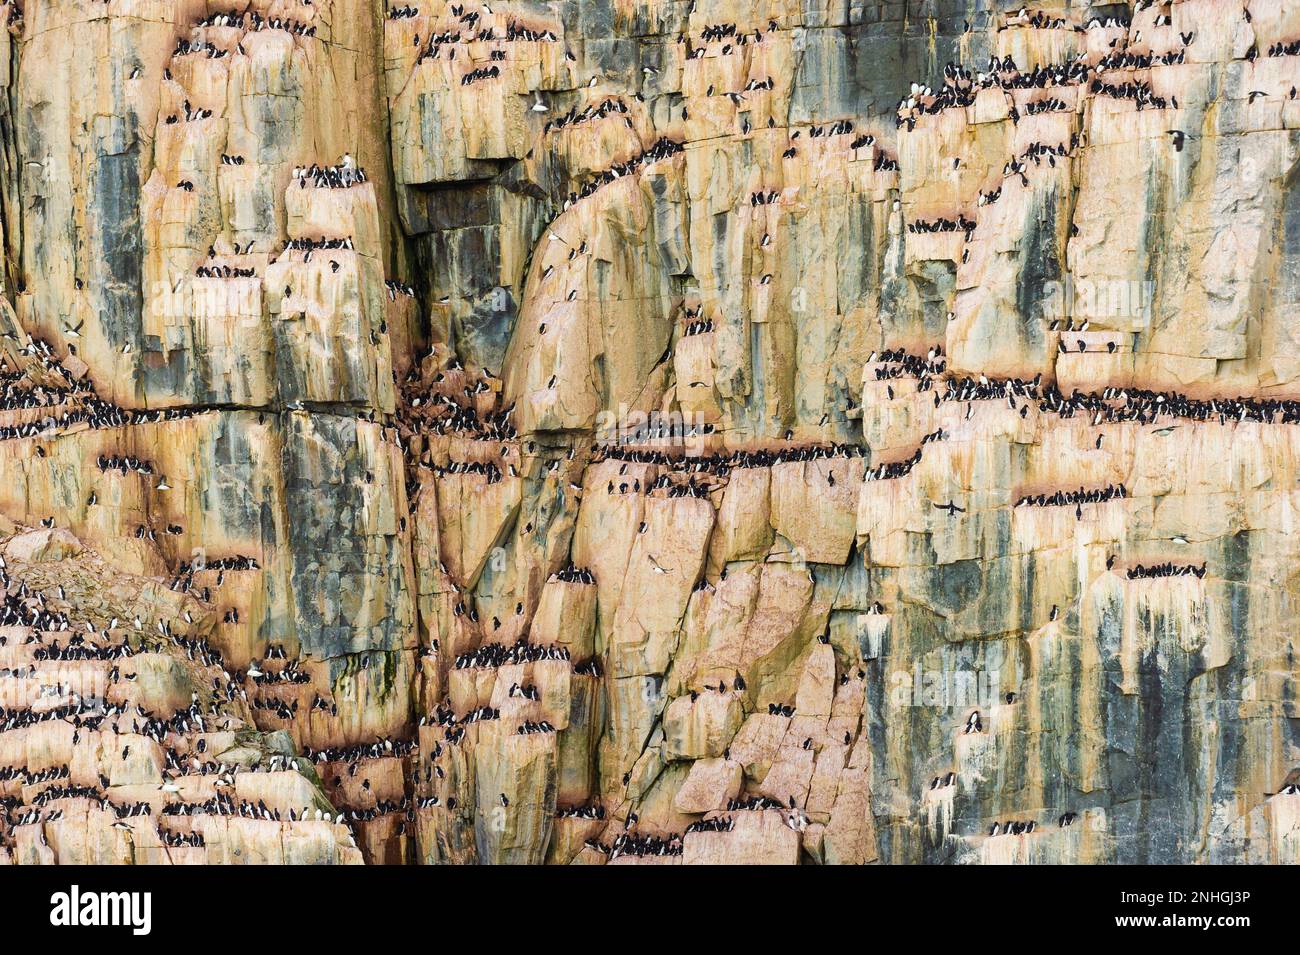 Thousands of sea birds nesting on the Alkefjellet cliffs in Kapp Fanshawe on the Svalbard Islands of Norway Stock Photo